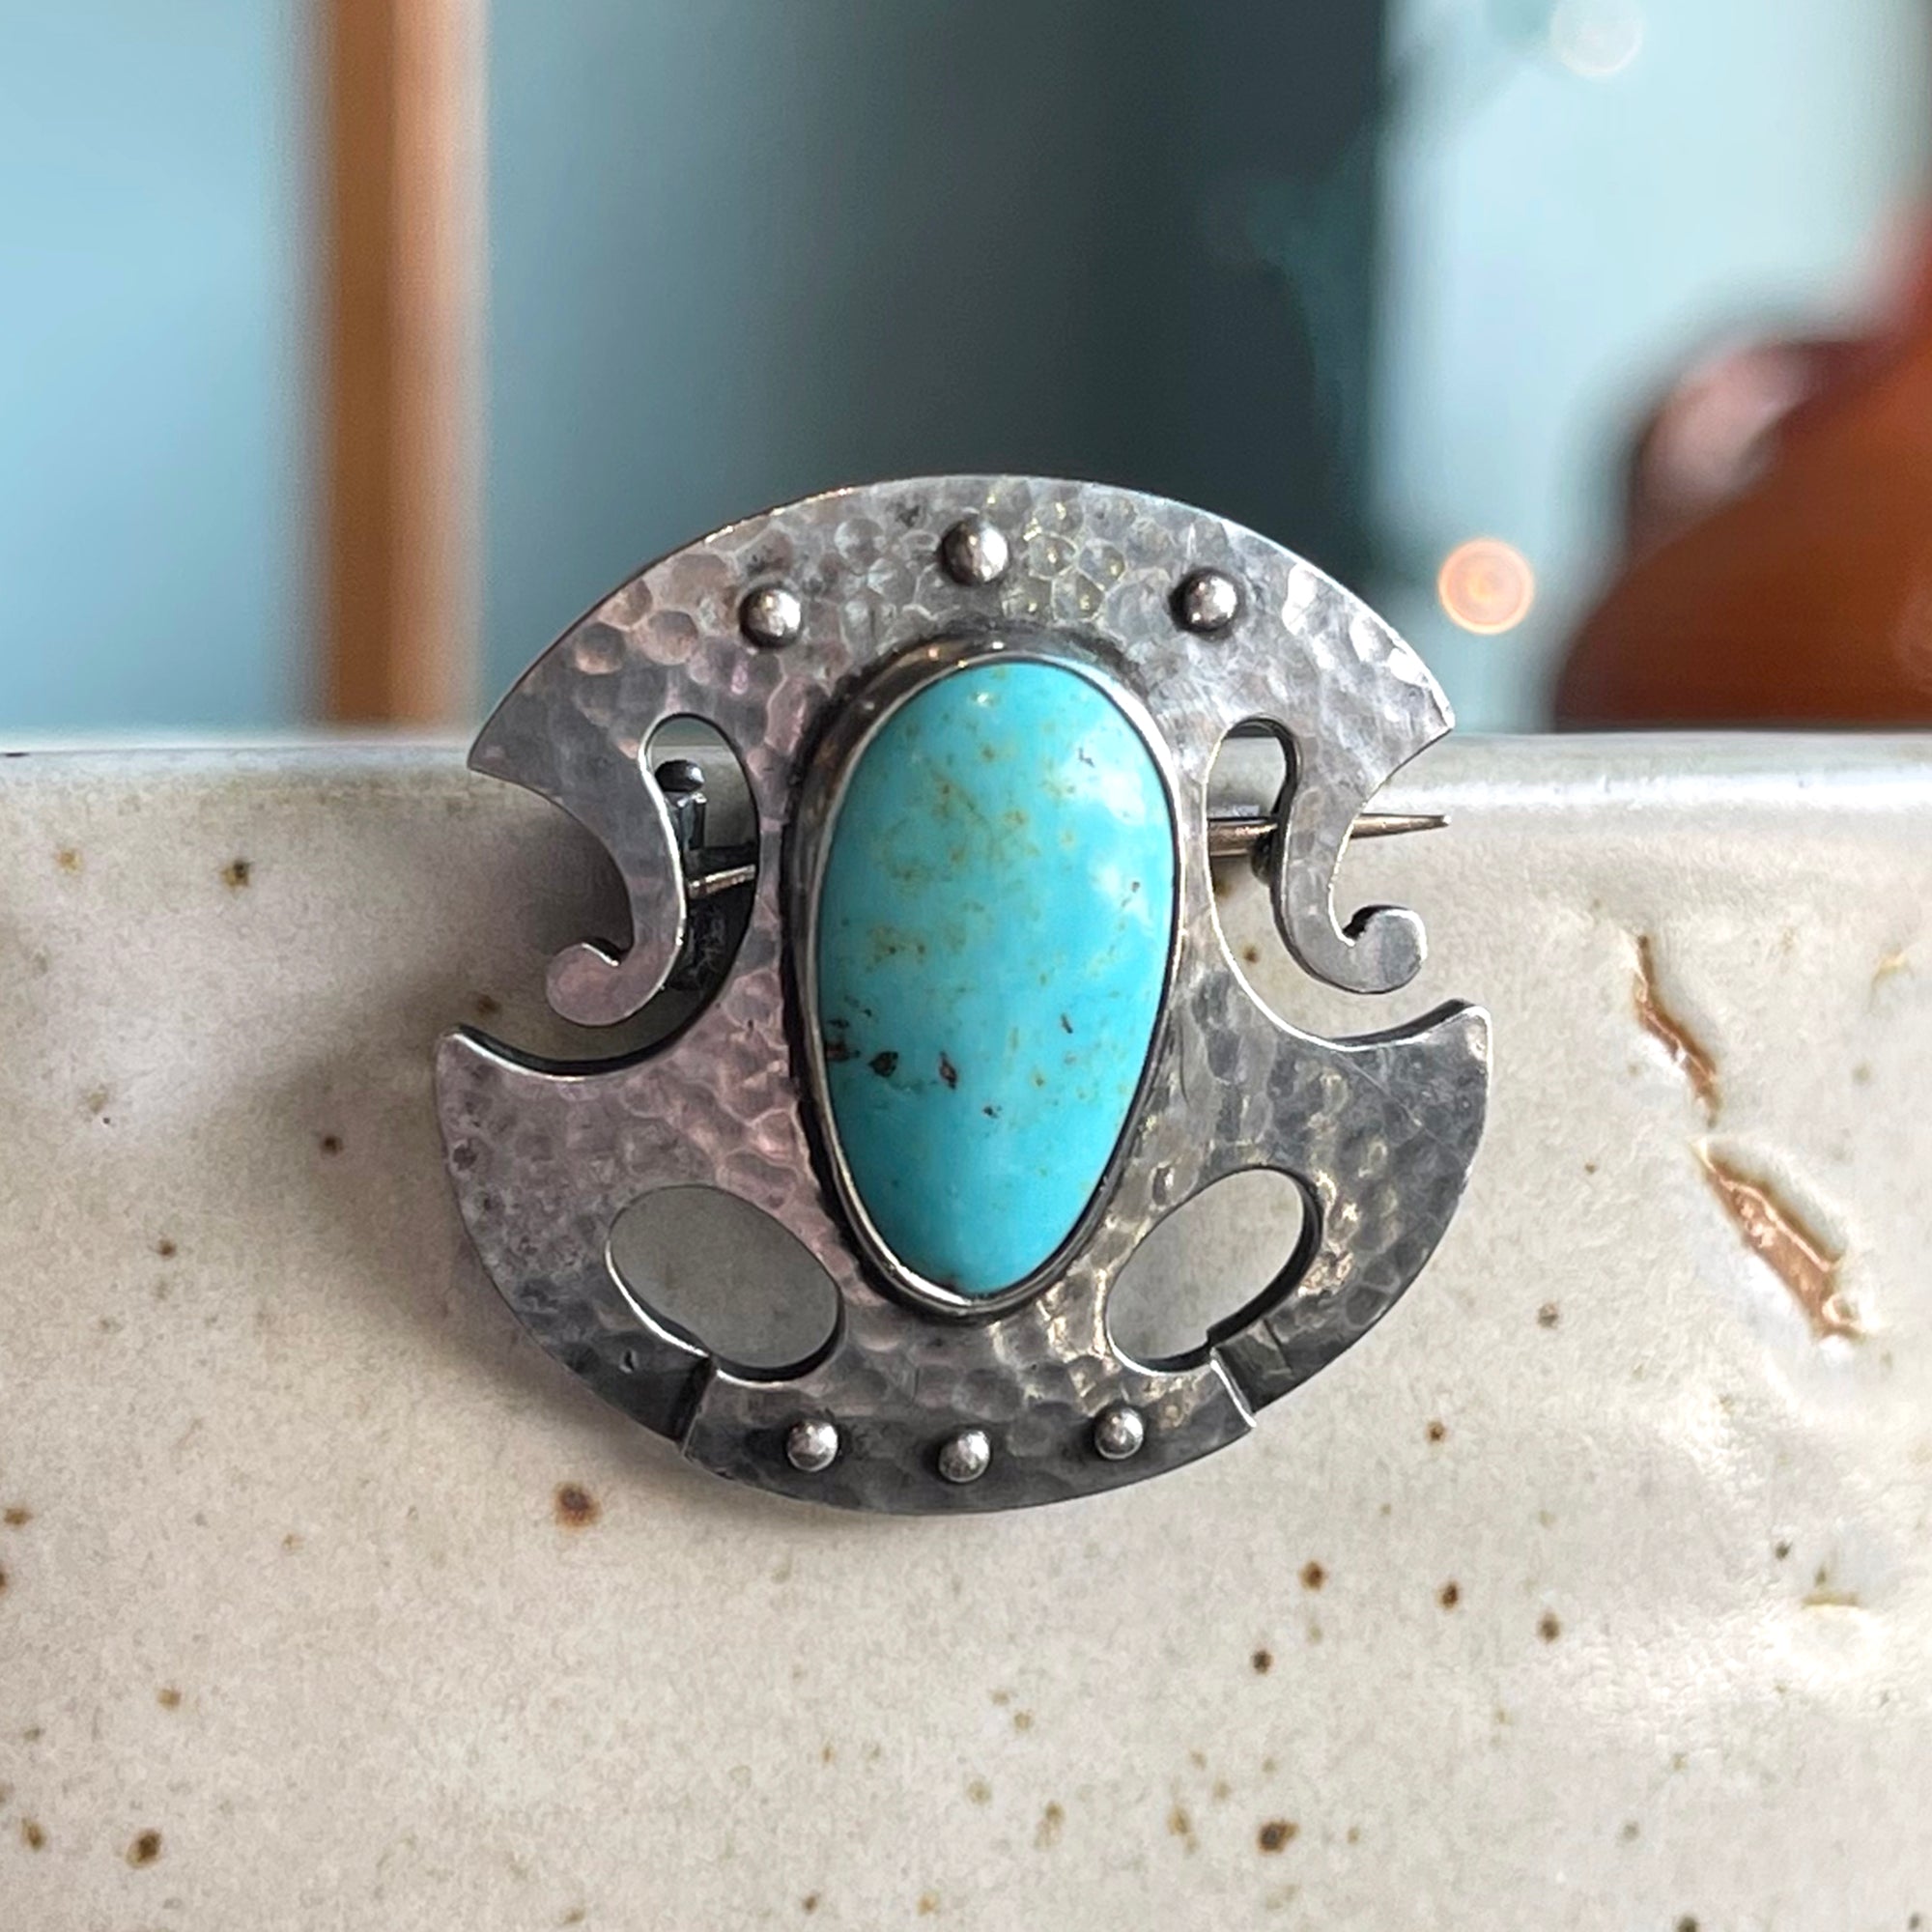 Arts and Crafts Era Murrle, Bennett and Co. Silver Turquoise Brooch